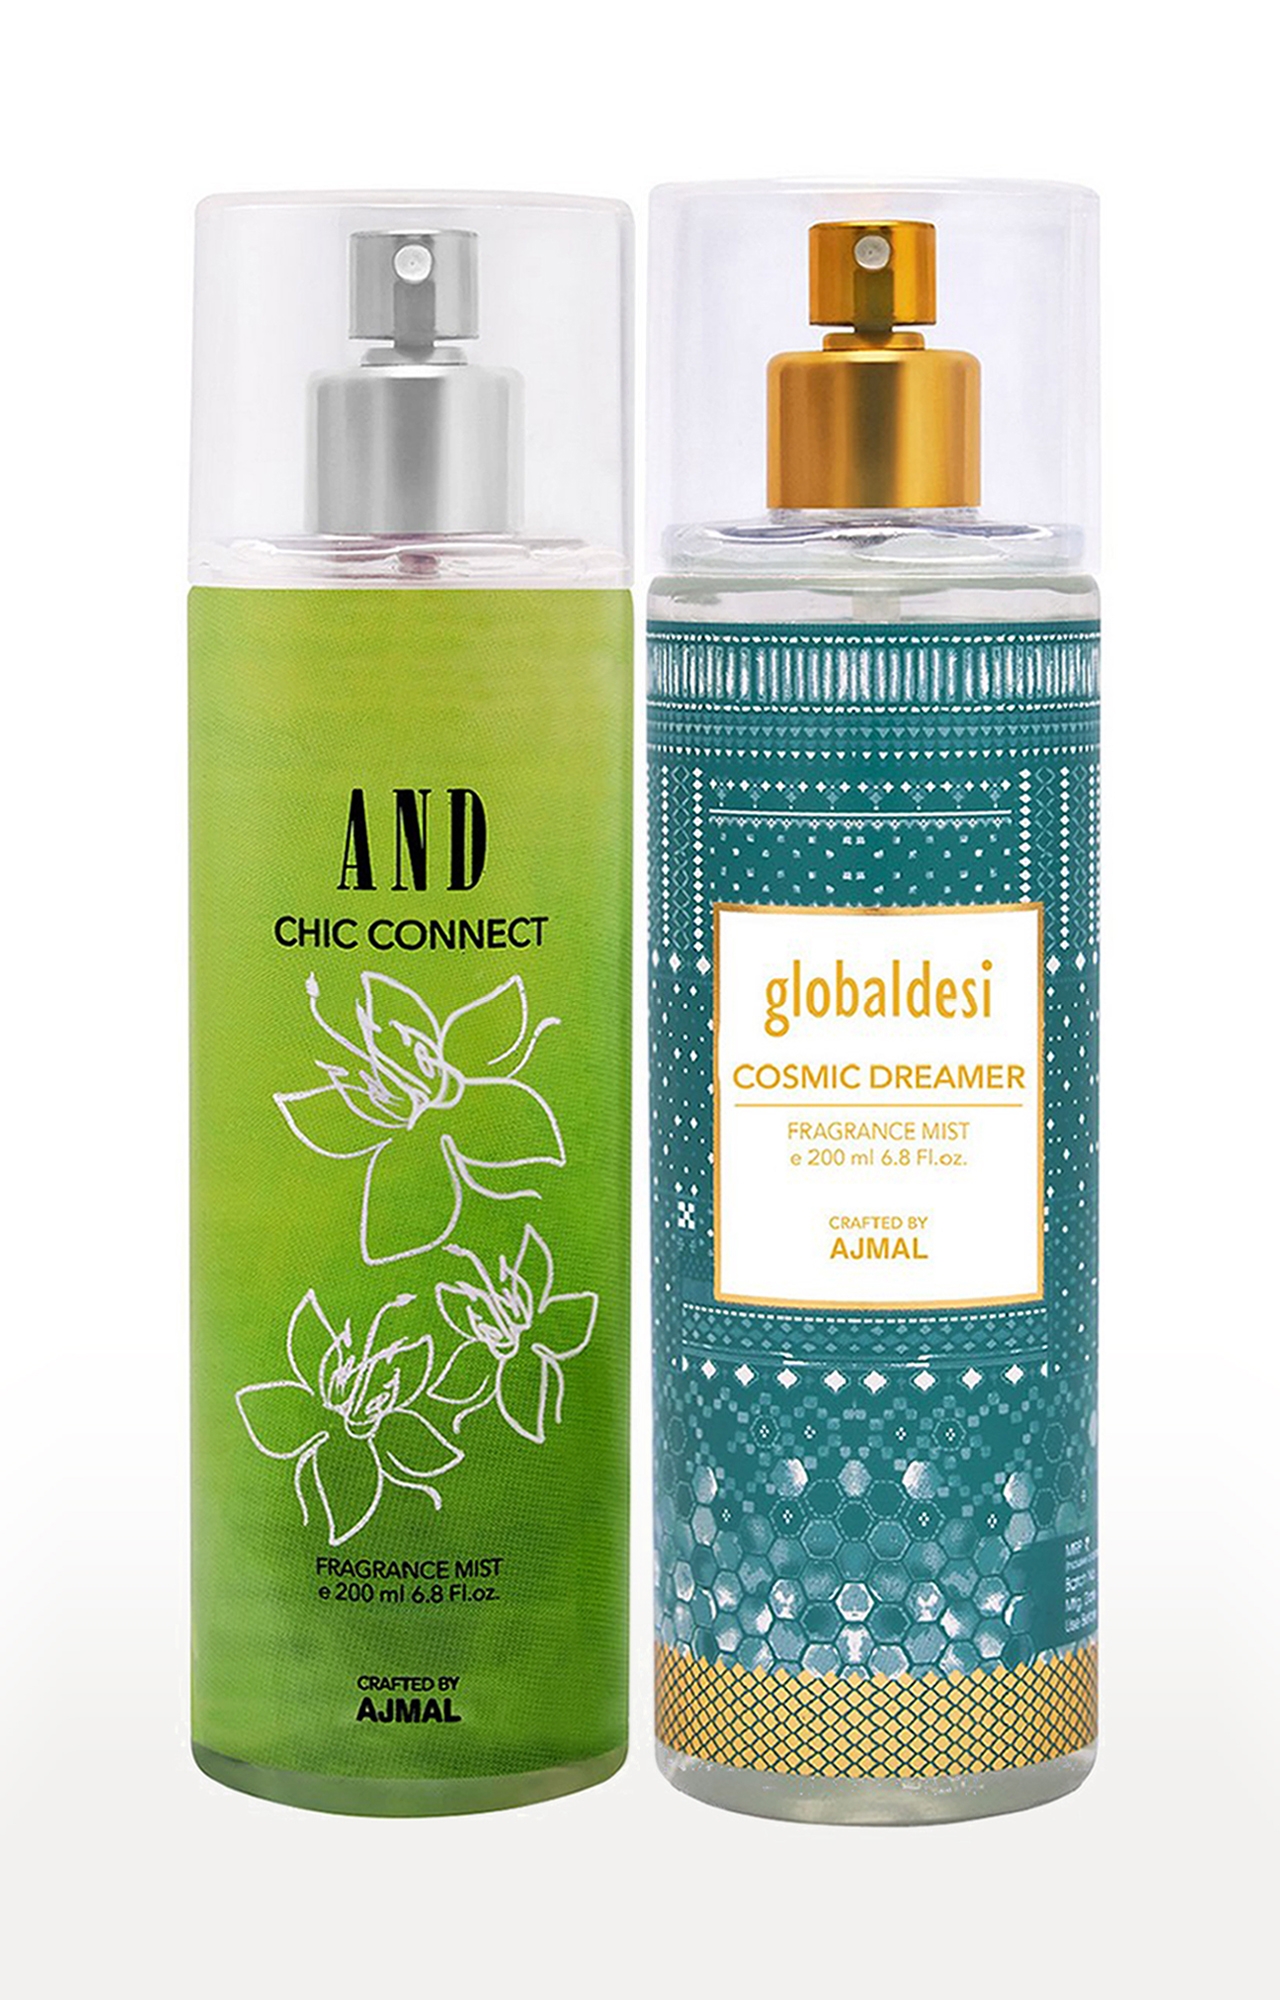 AND Crafted By Ajmal | AND Chi Connect Body Mist 200ML & Global Desi Cosmic Dreamer Body Mist 200ML Long Lasting Scent Spray Gift For Women Perfume FREE